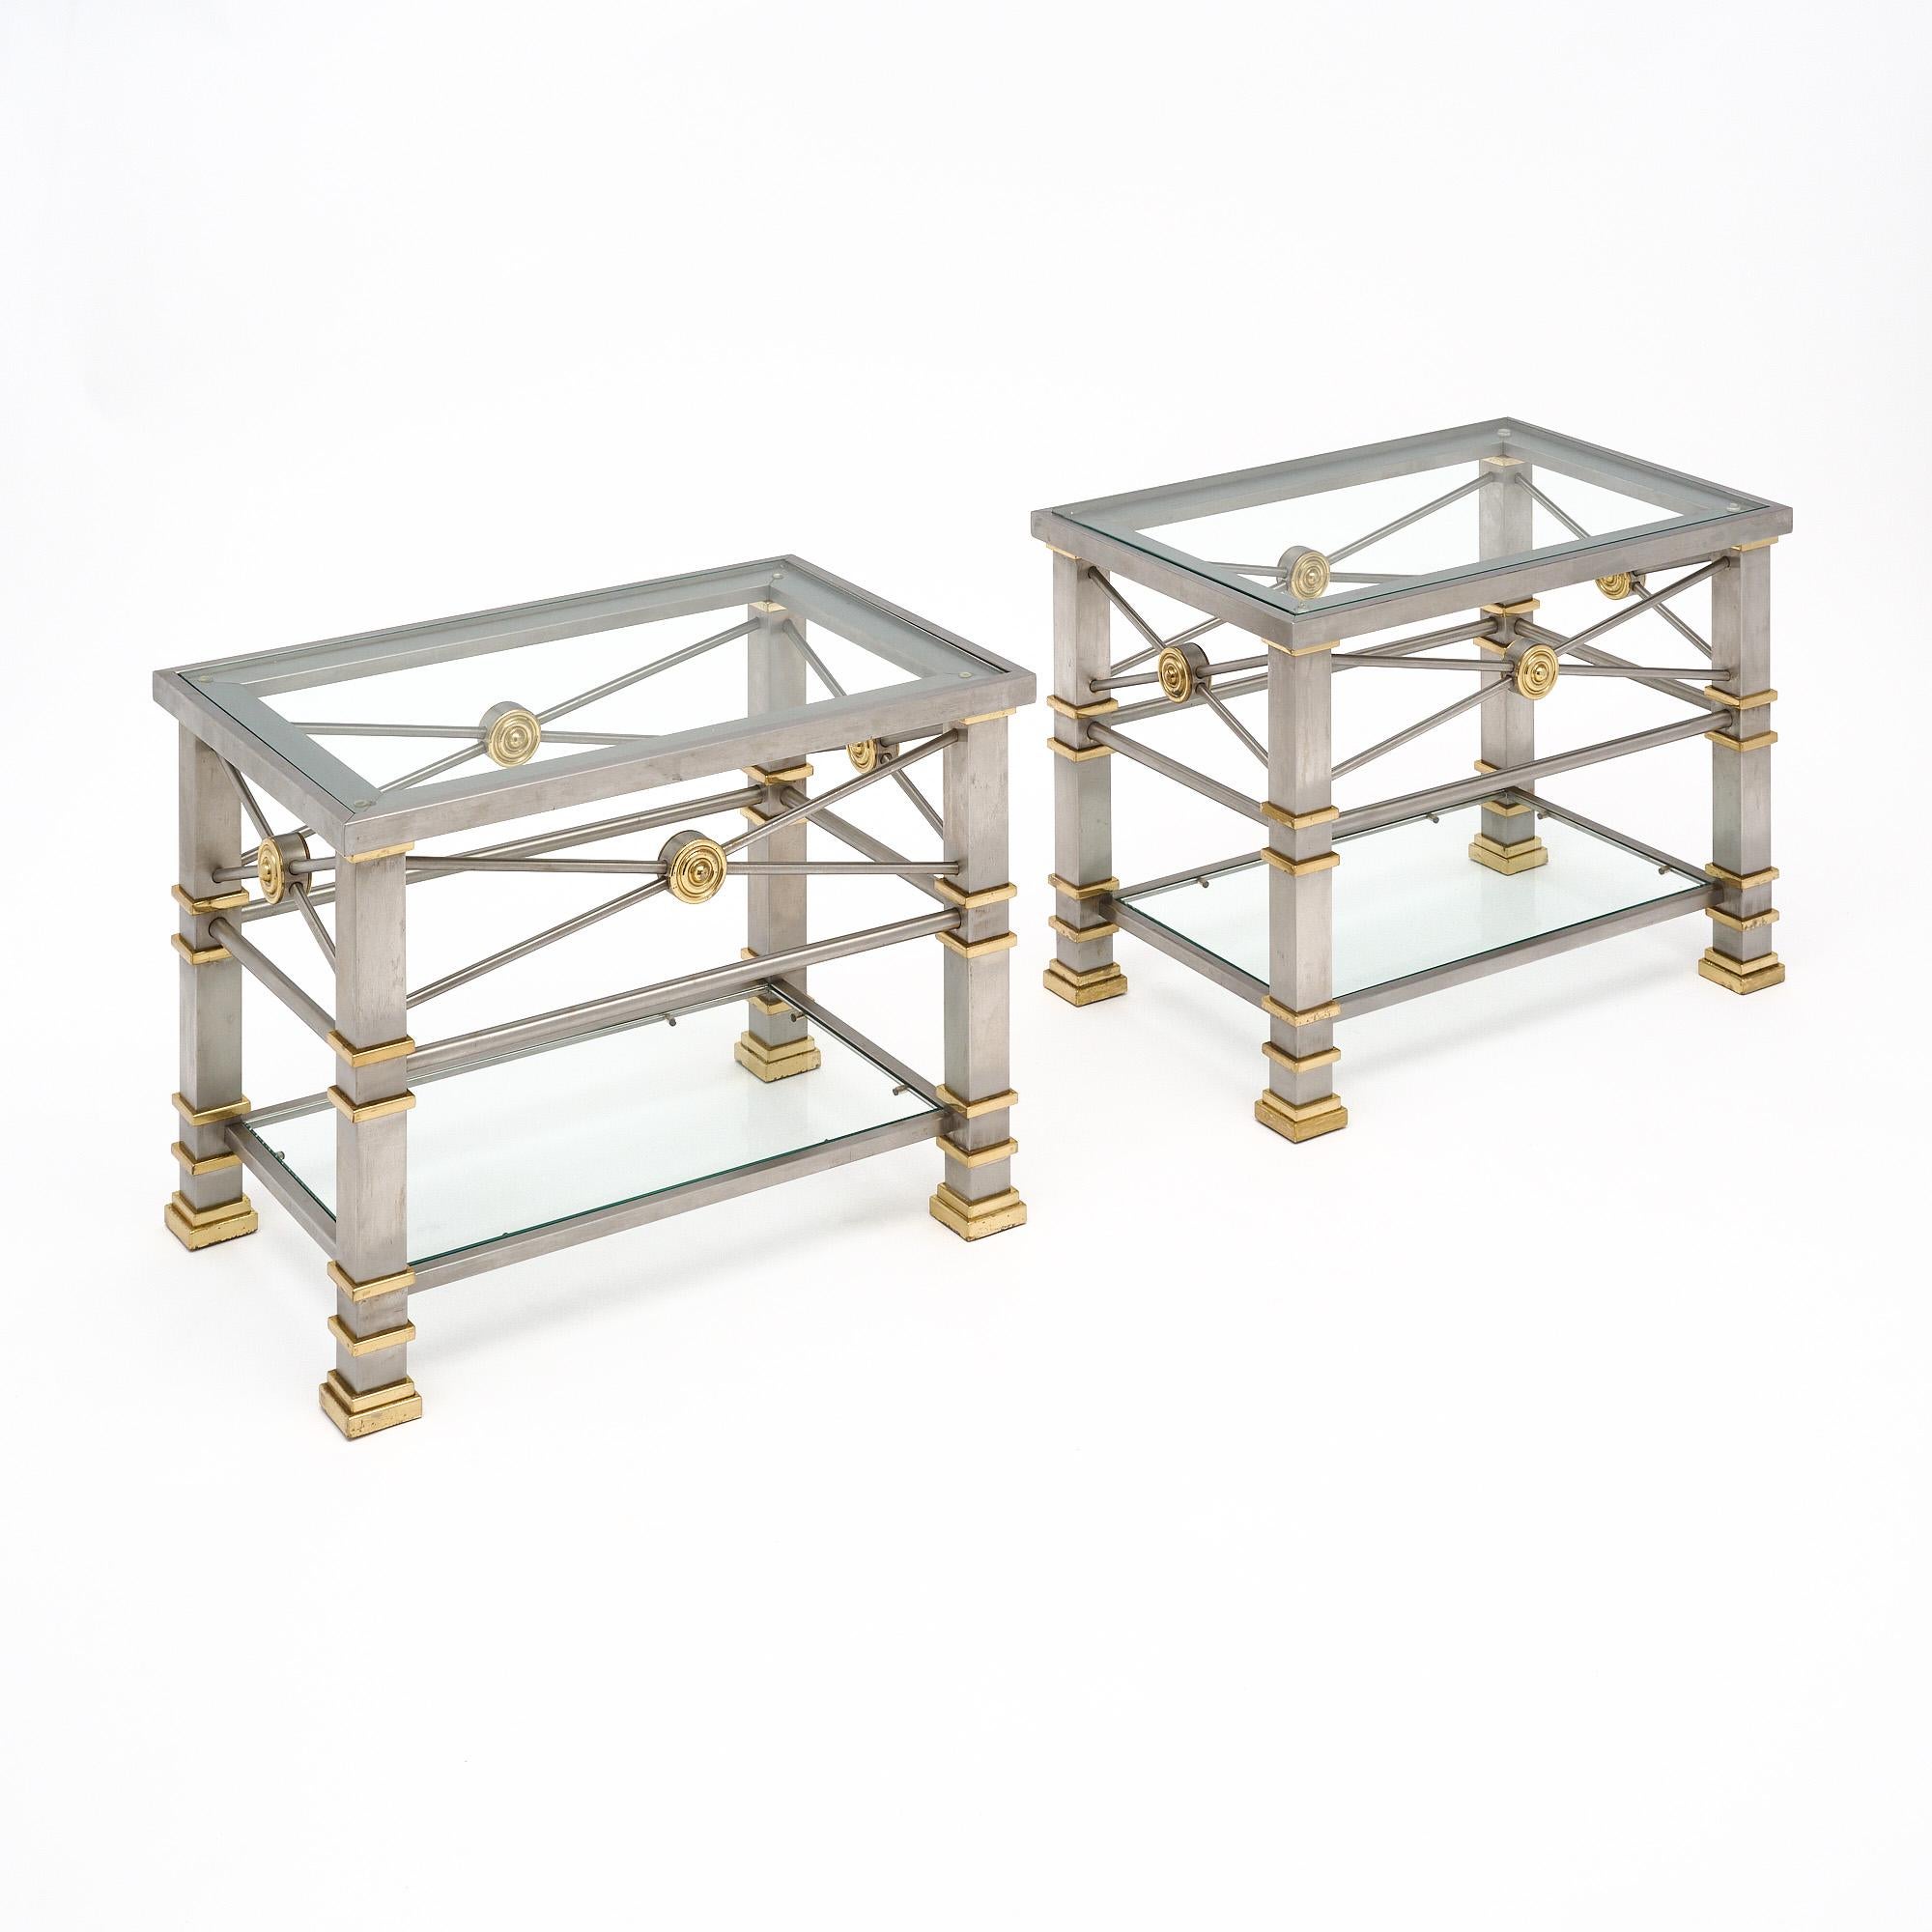 Pair of side tables from France with chrome structures and details in brass. We love the x-shaped stretchers and strong design. Each table has a glass top and a lower glass shelf.